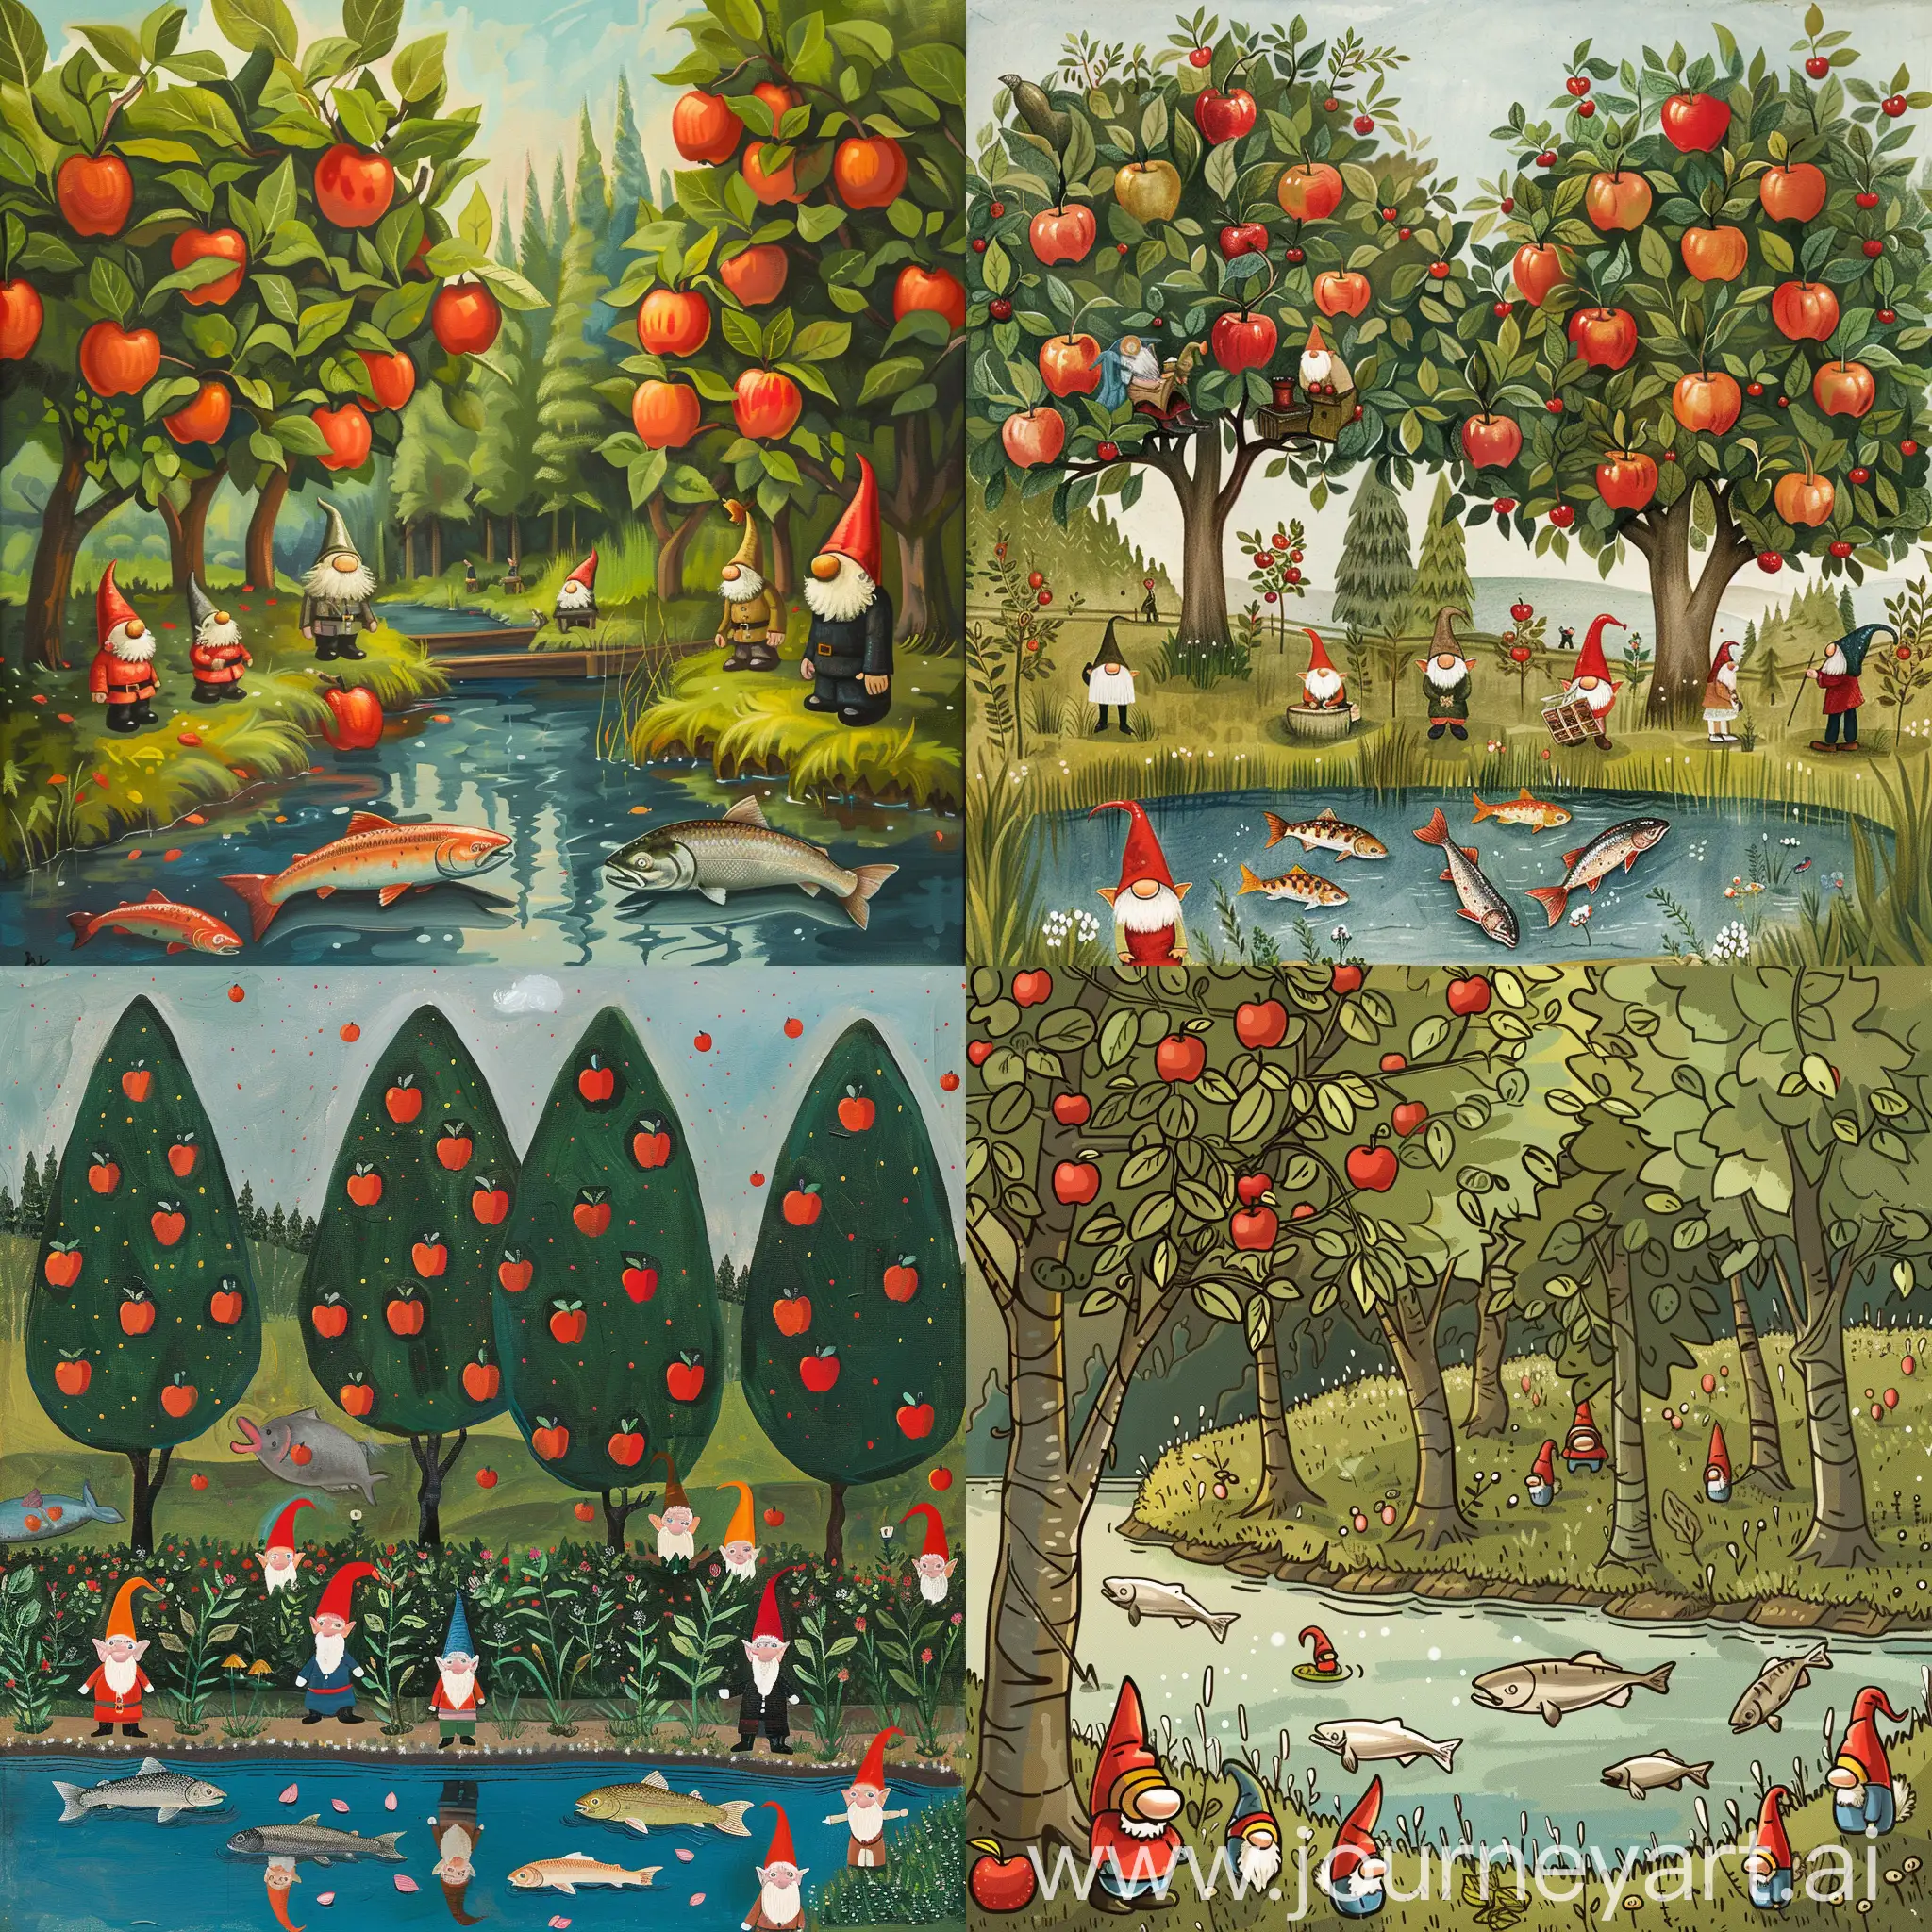 Gnomes-Gathering-by-the-Apple-Trees-with-Pond-and-Salmon